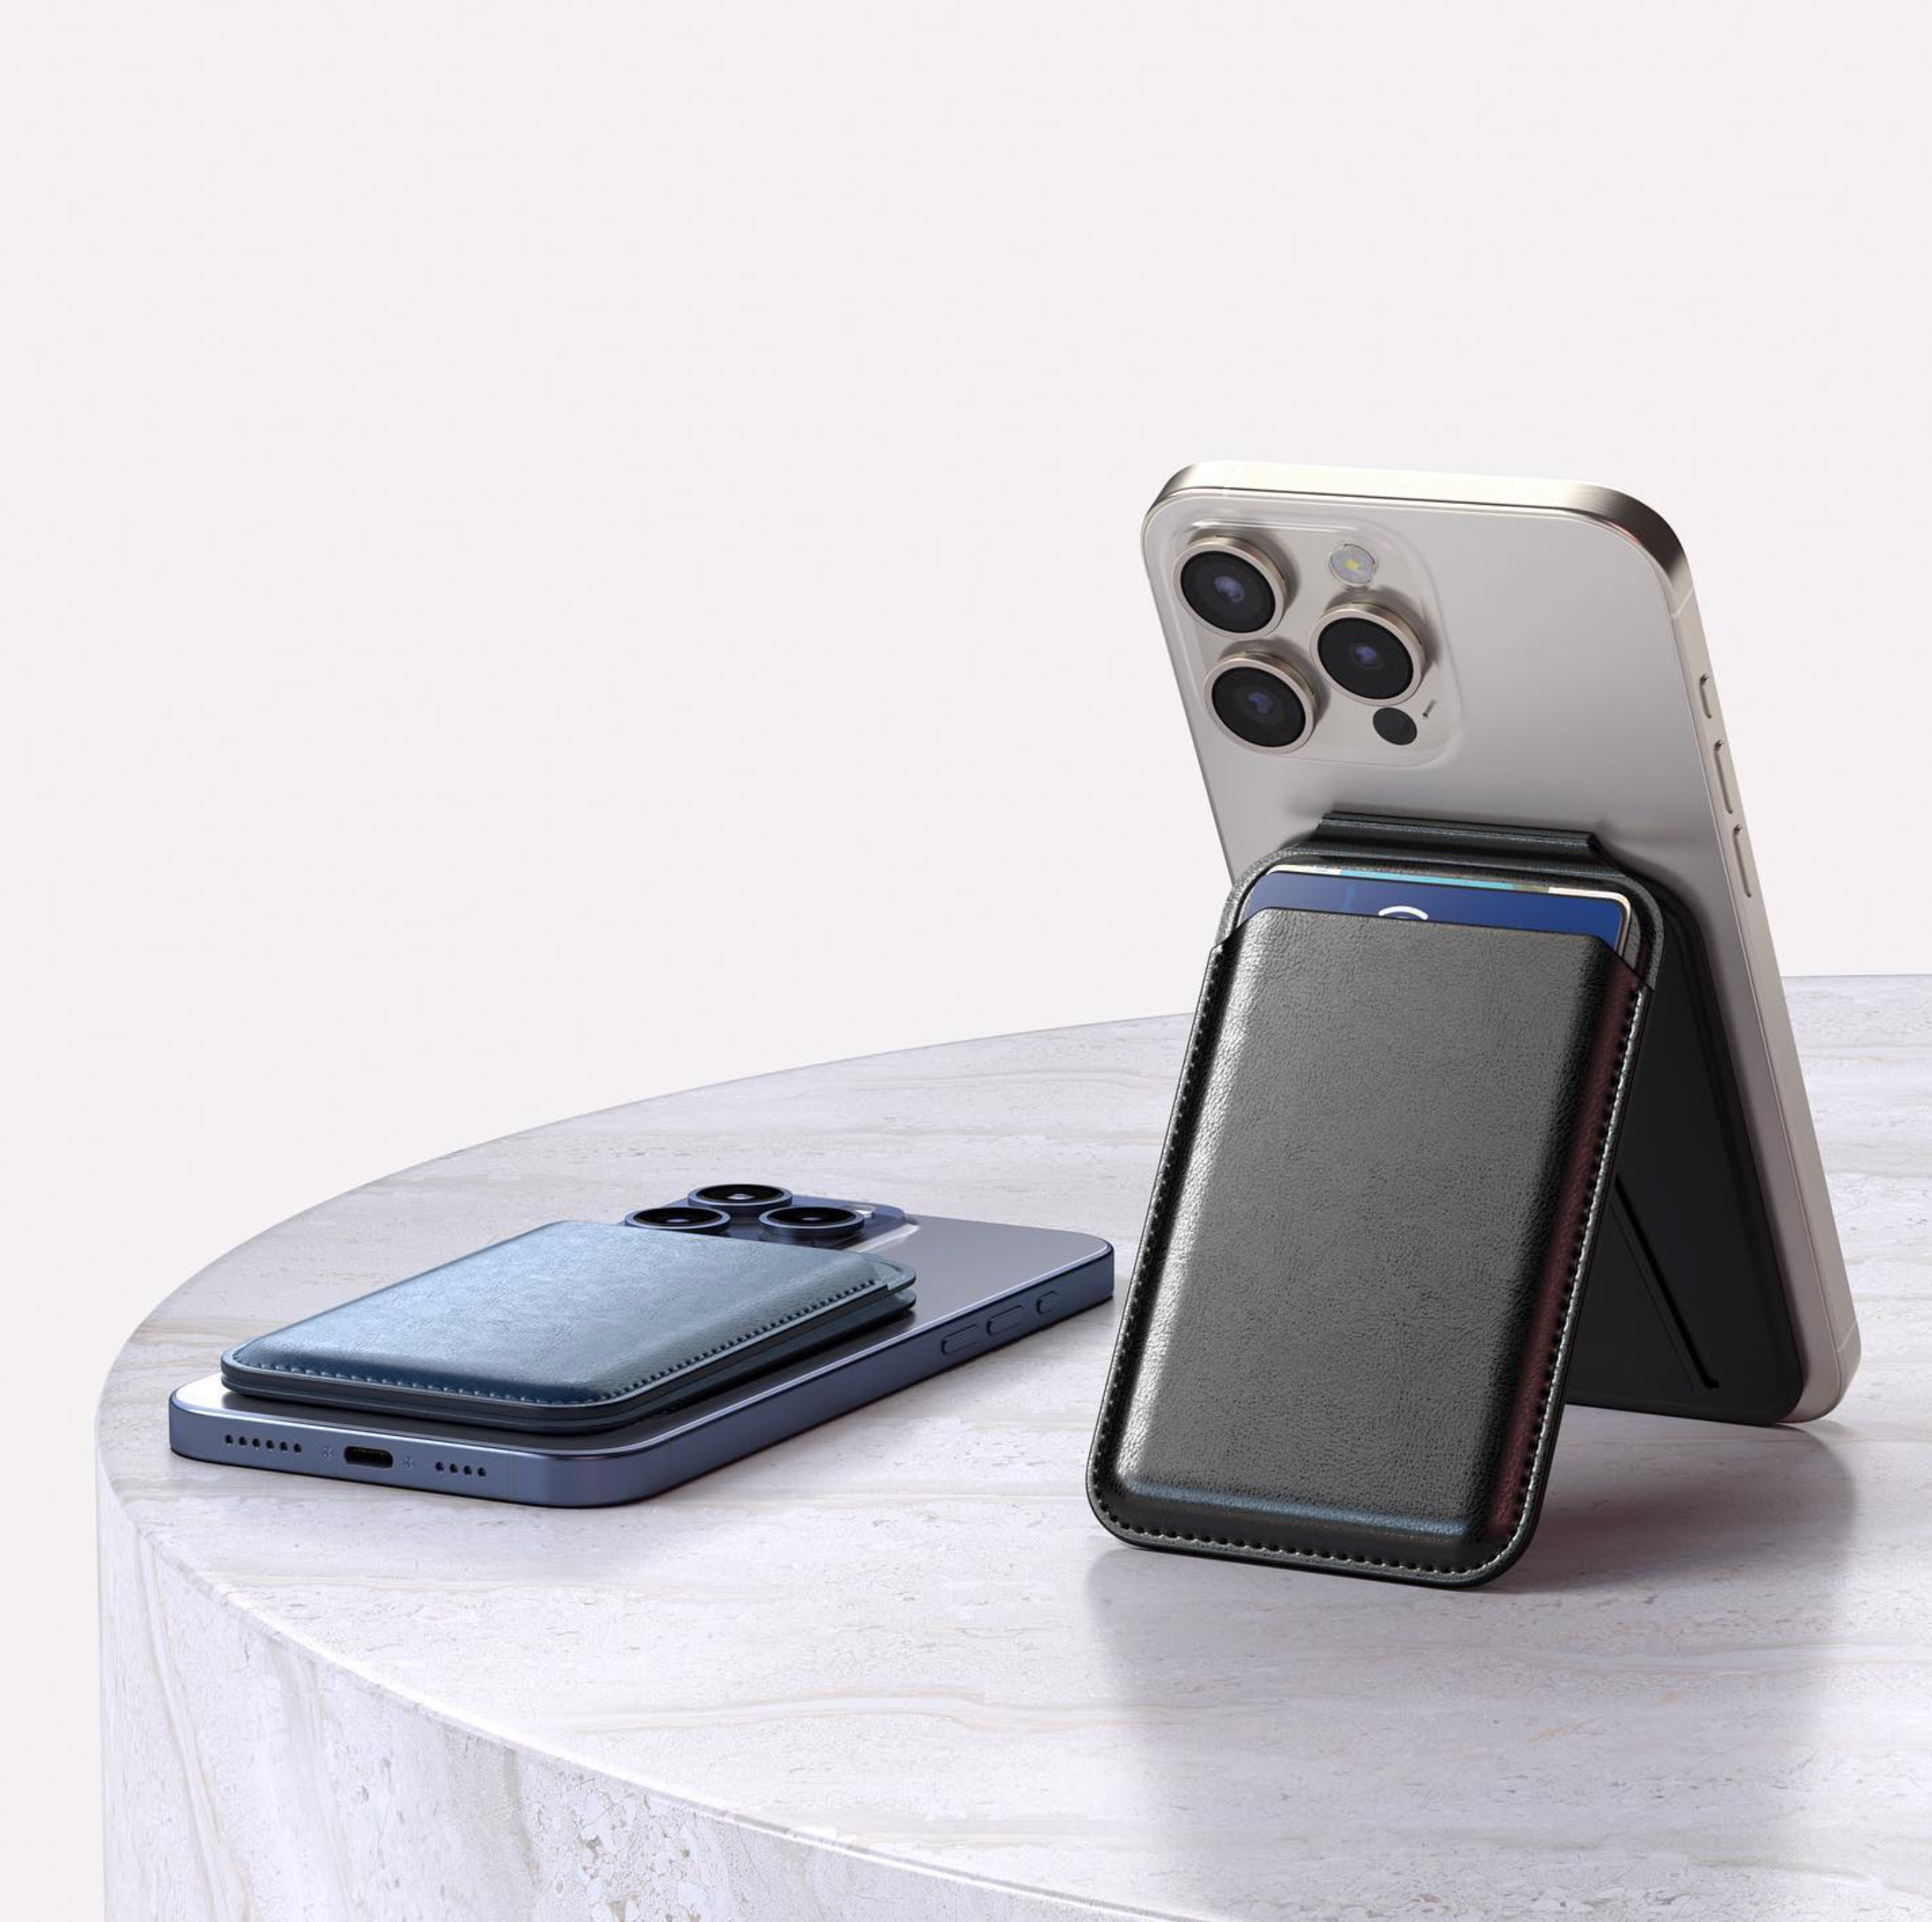 Satechi Magnetic wallet stand attached to the iPhone